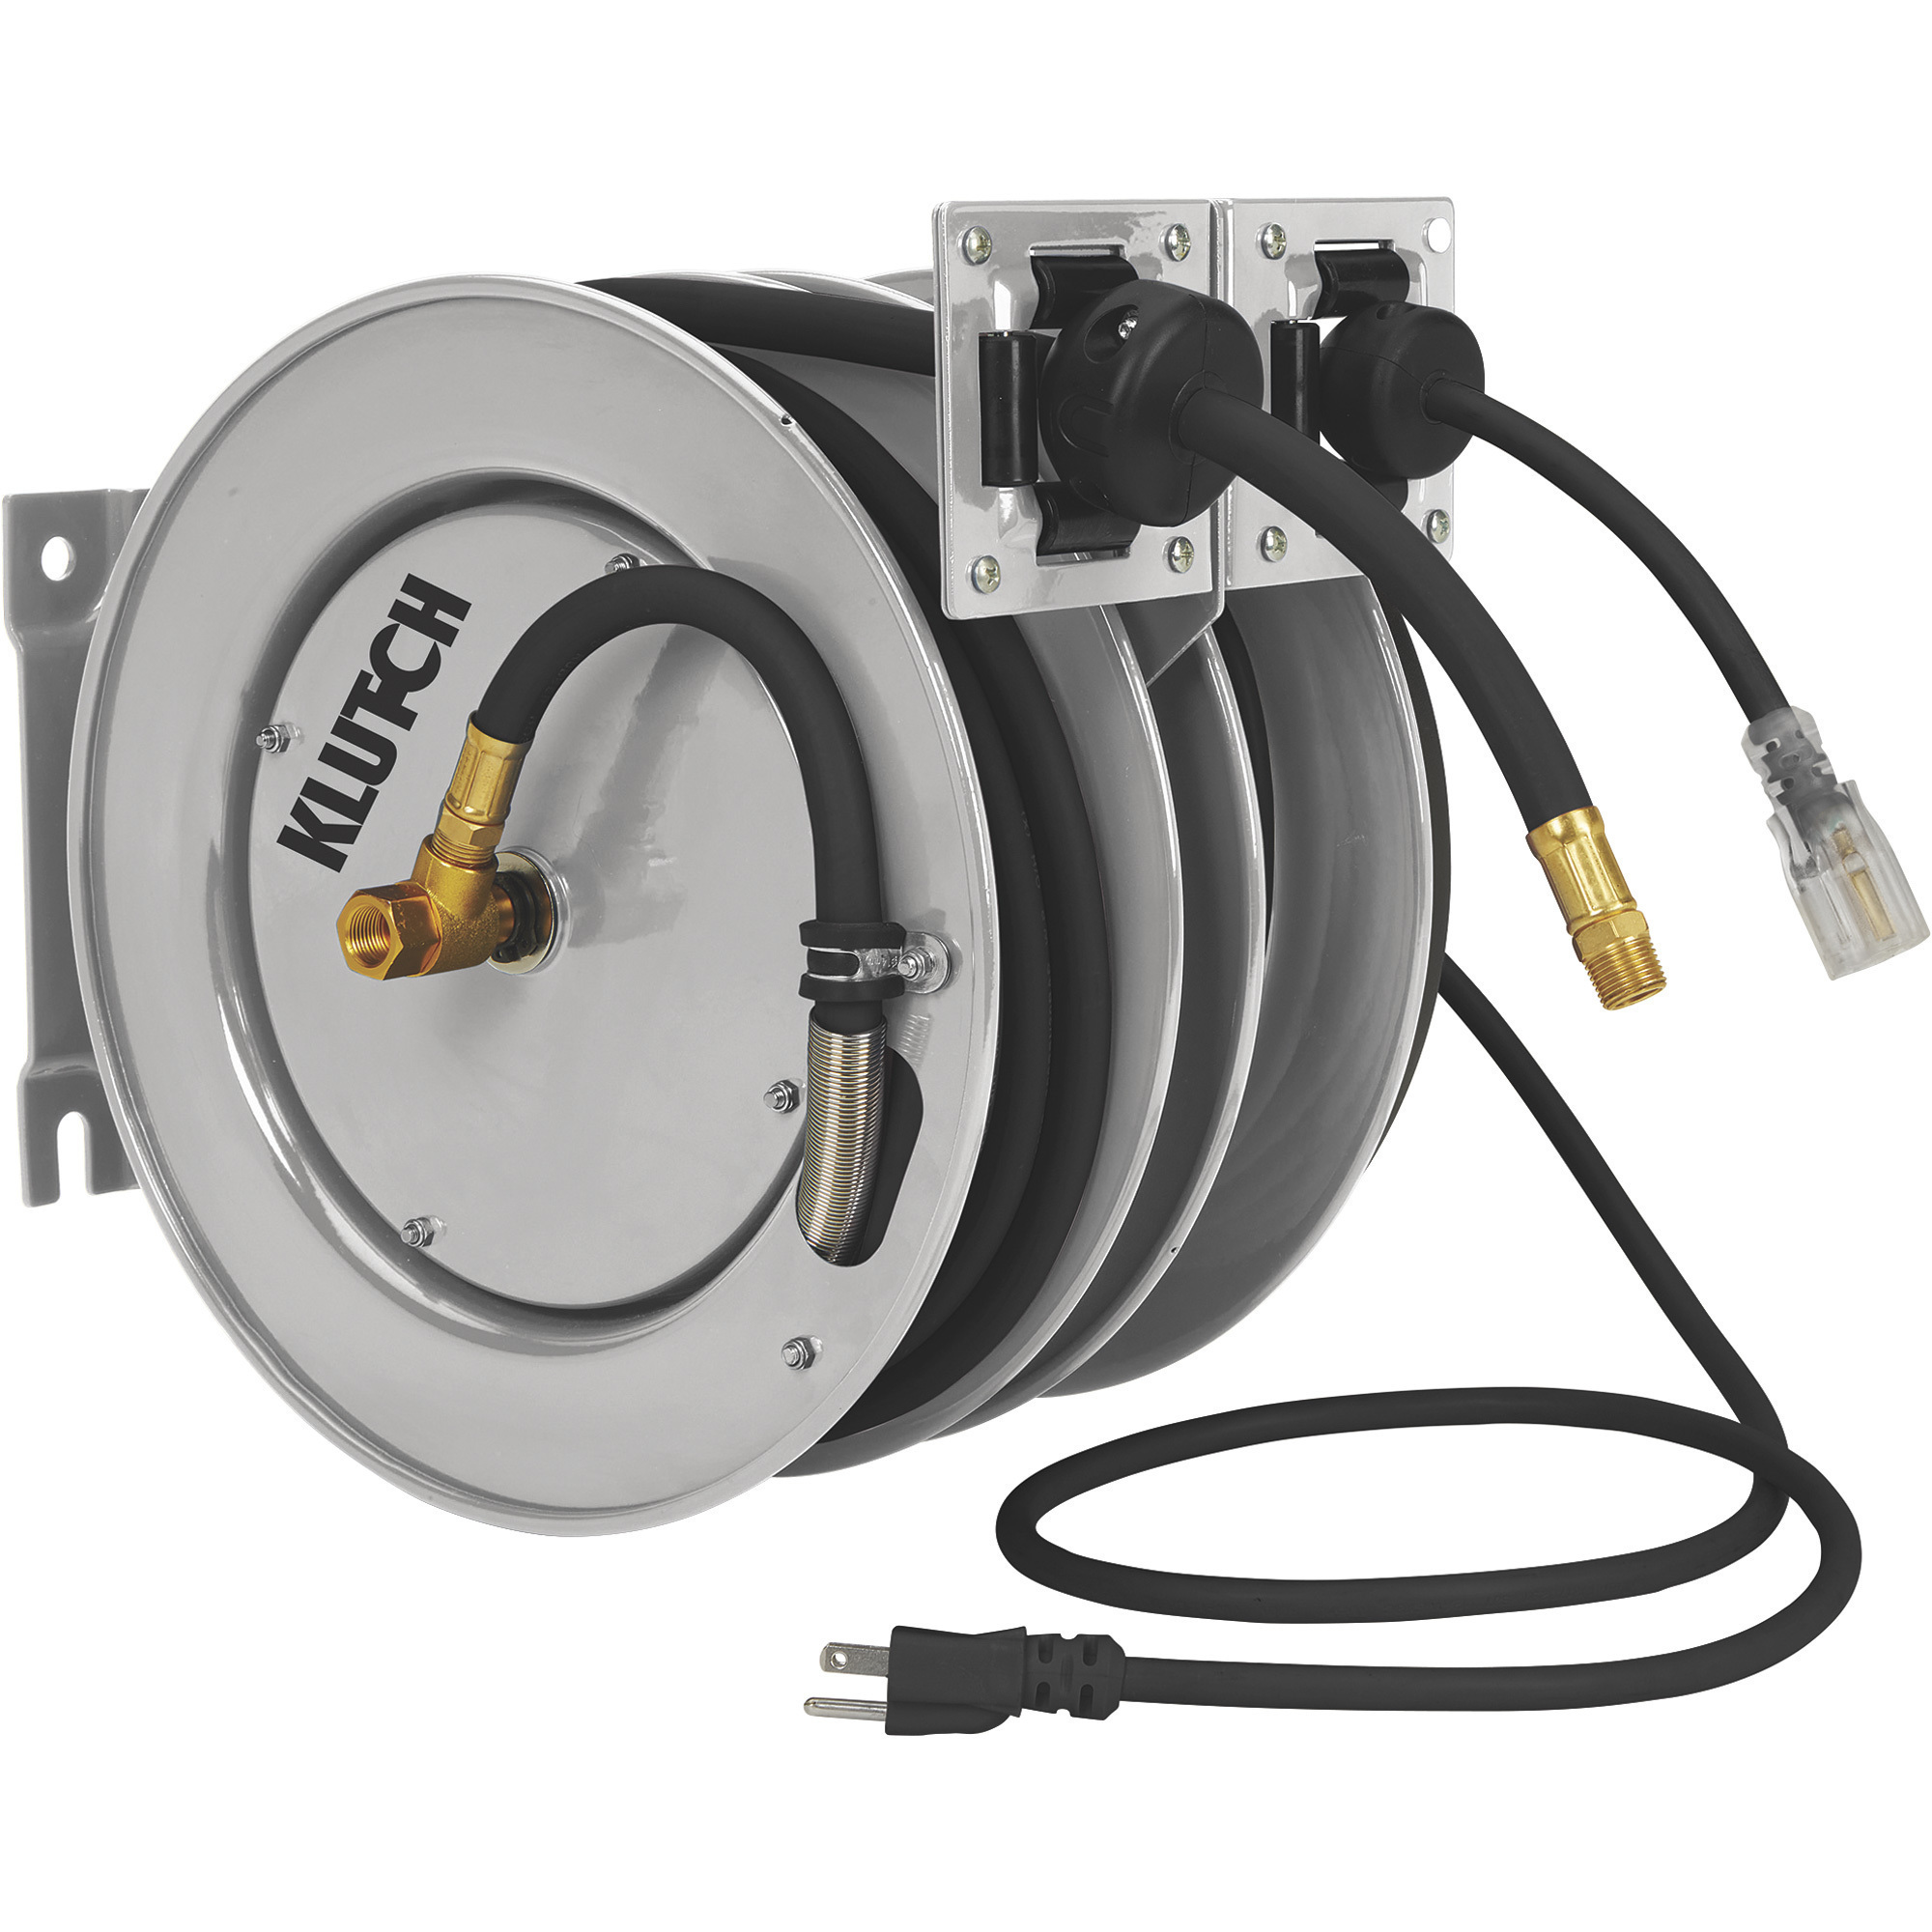 Klutch Heavy-Duty Auto-Rewind Air Hose Reel, With 3/8in. x 50ft